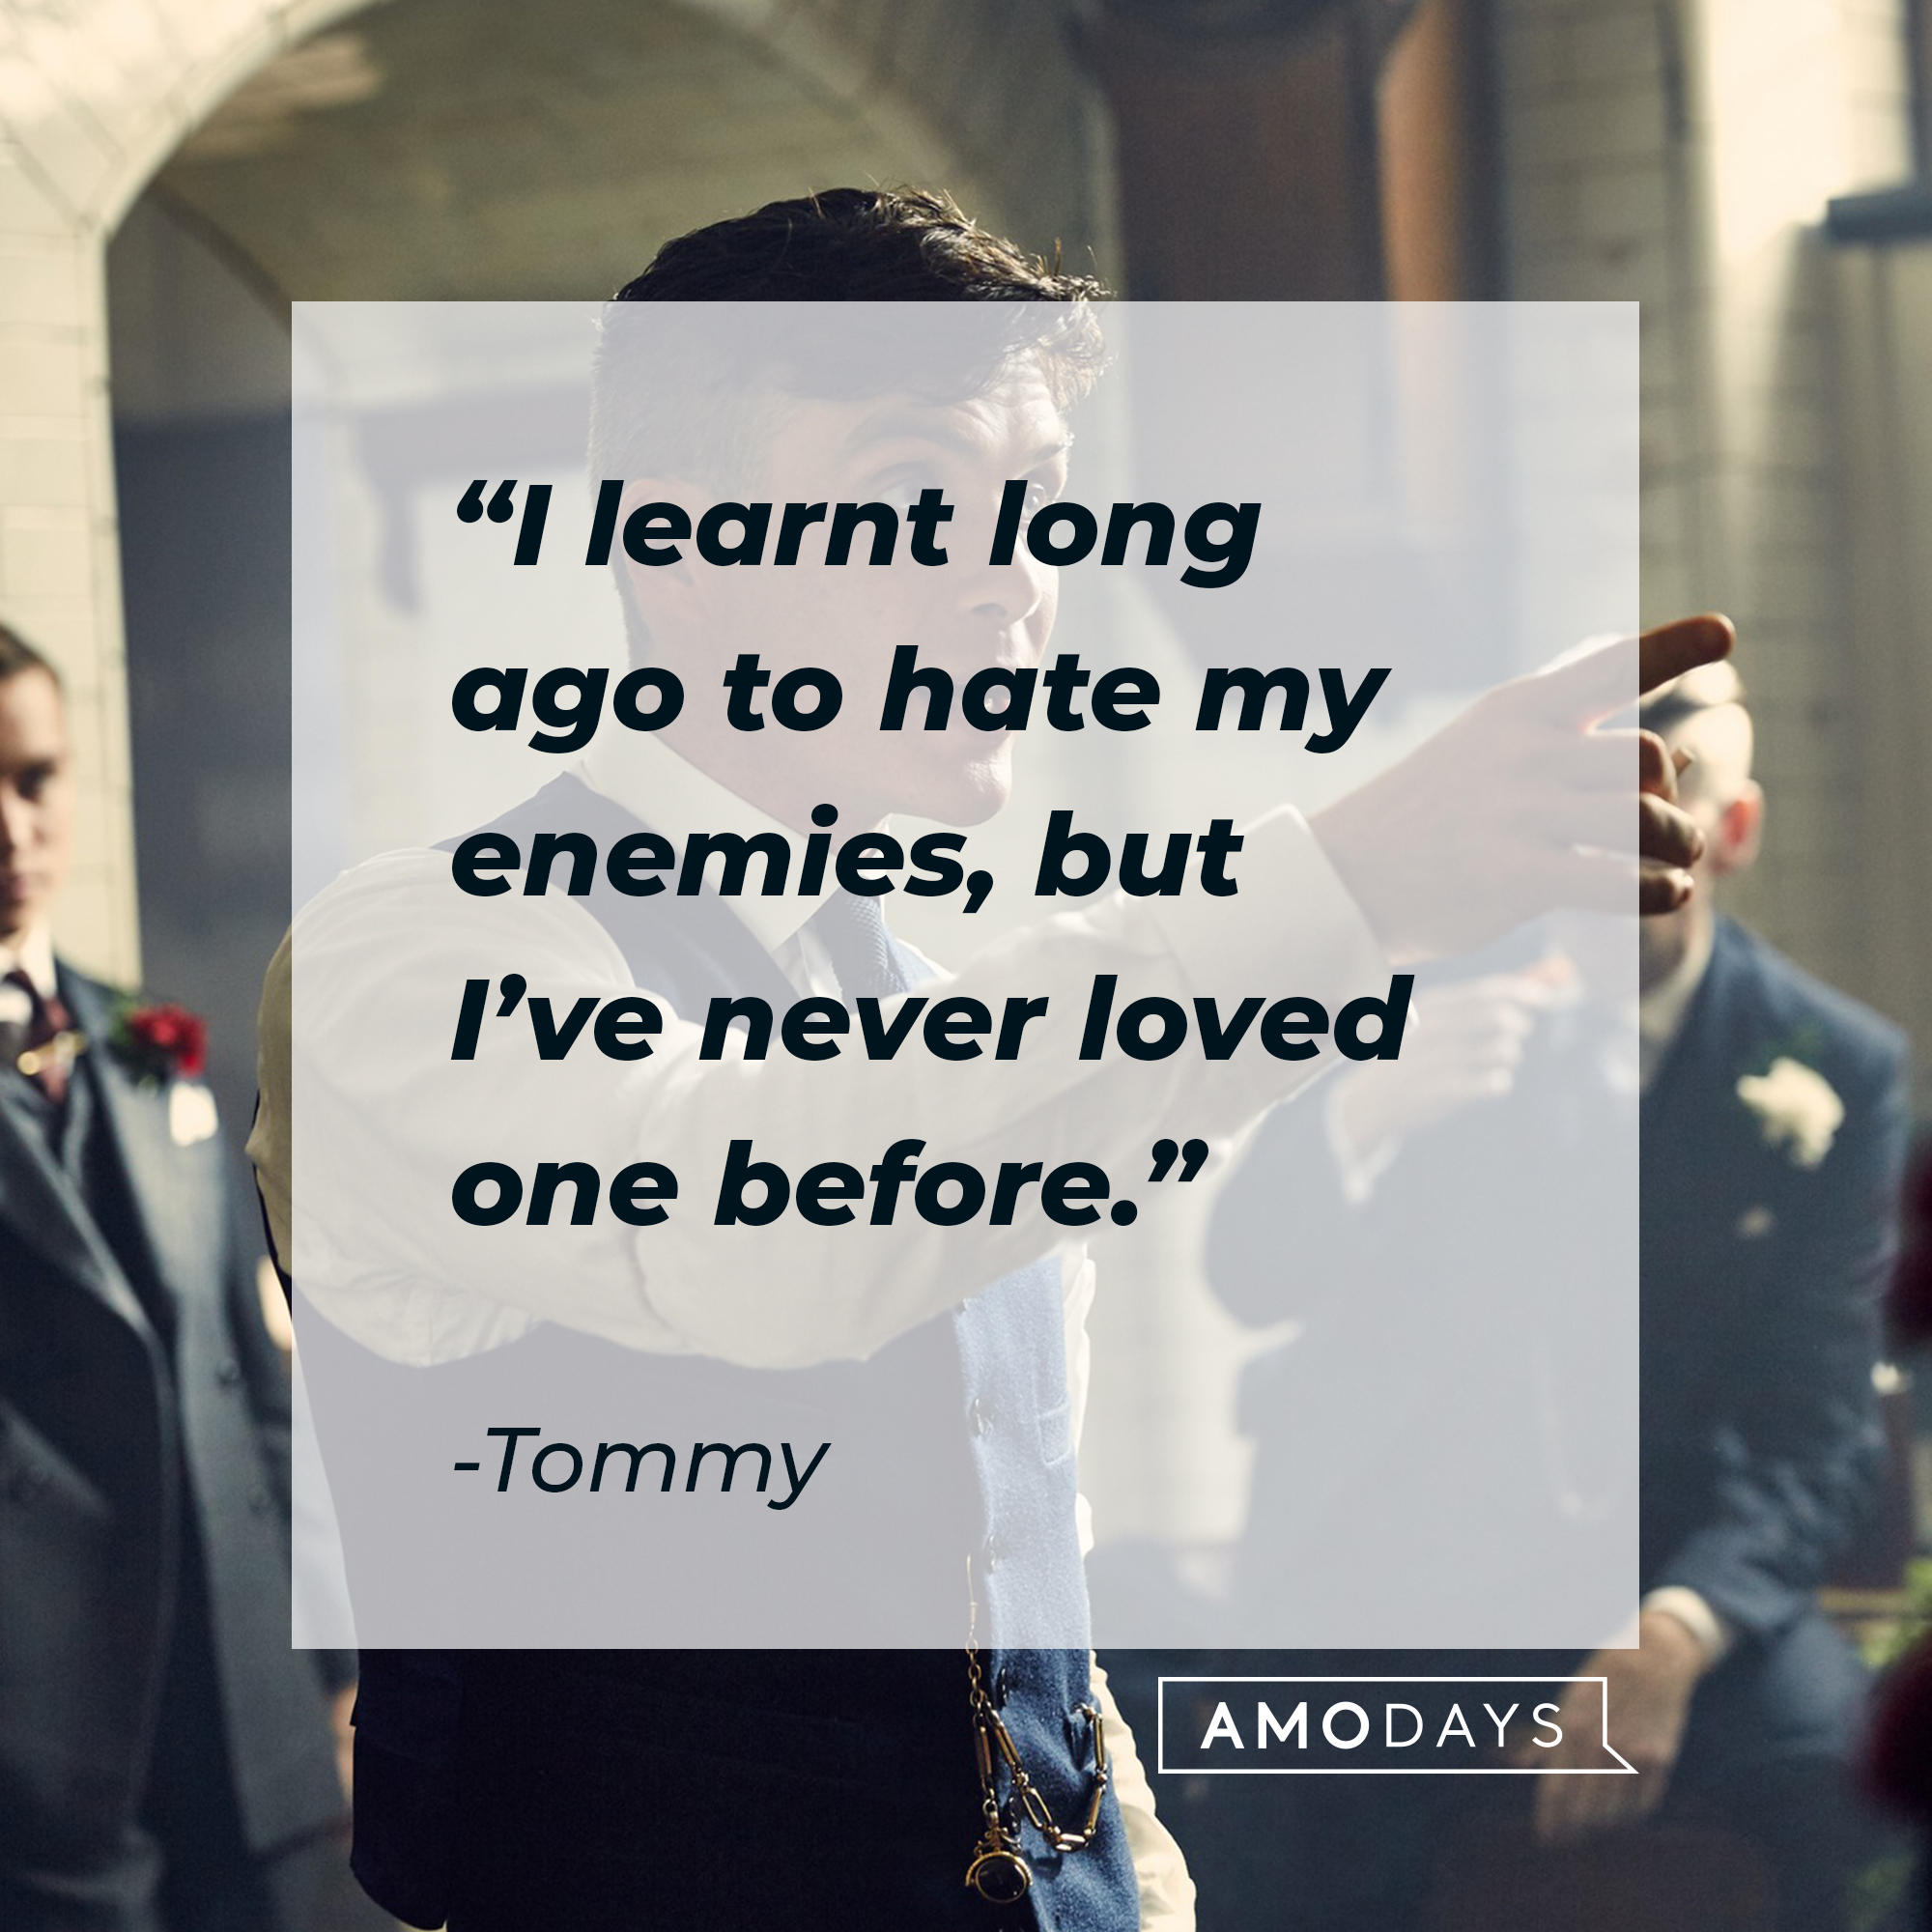 Tommy's quote: "I learnt long along to hate my enemies, but I've never loved one before." | Source: facebook.com/PeakyBlinders